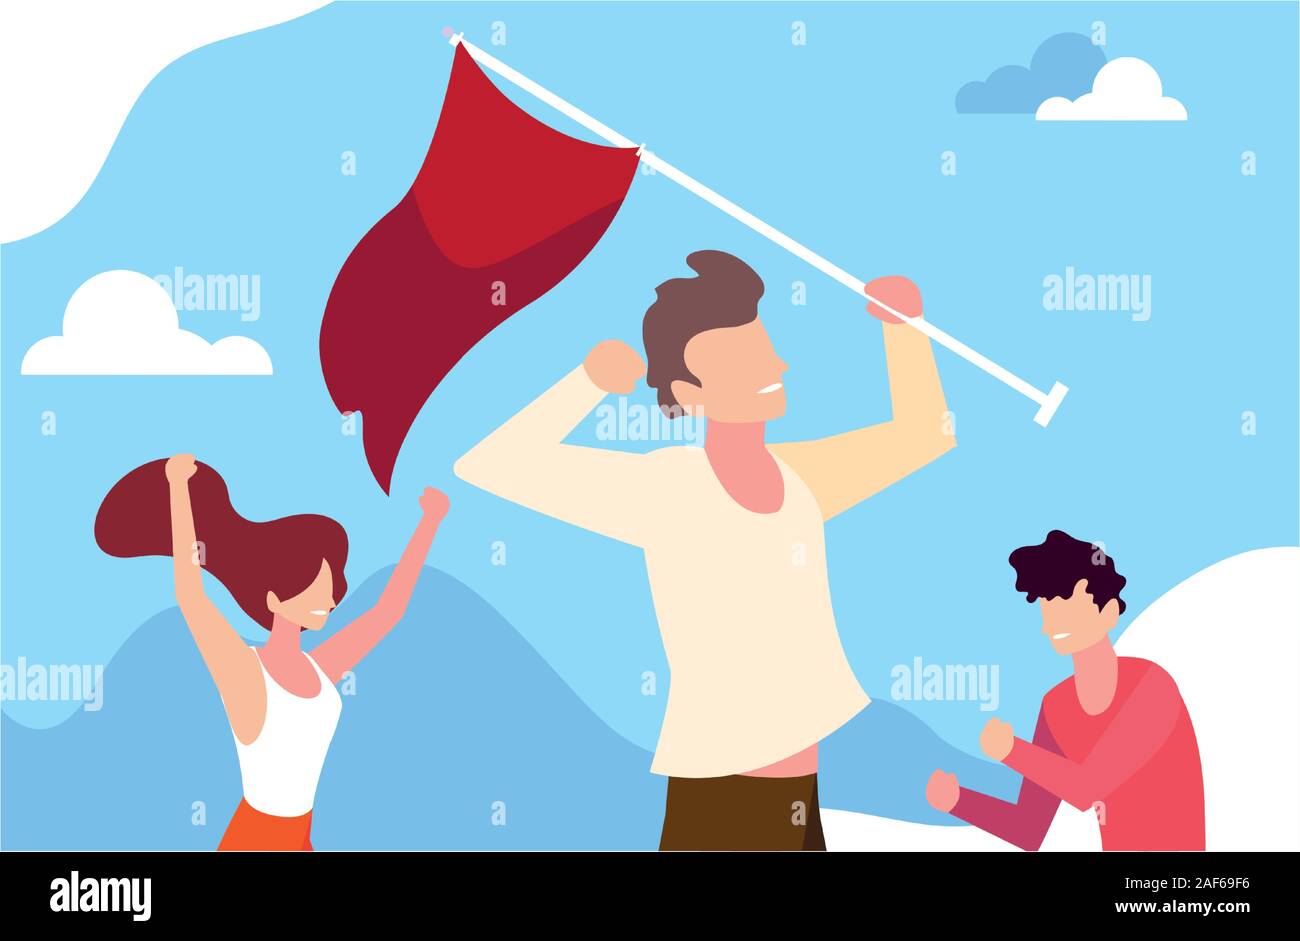 group of people holding a red flag vector illustration design Stock Vector